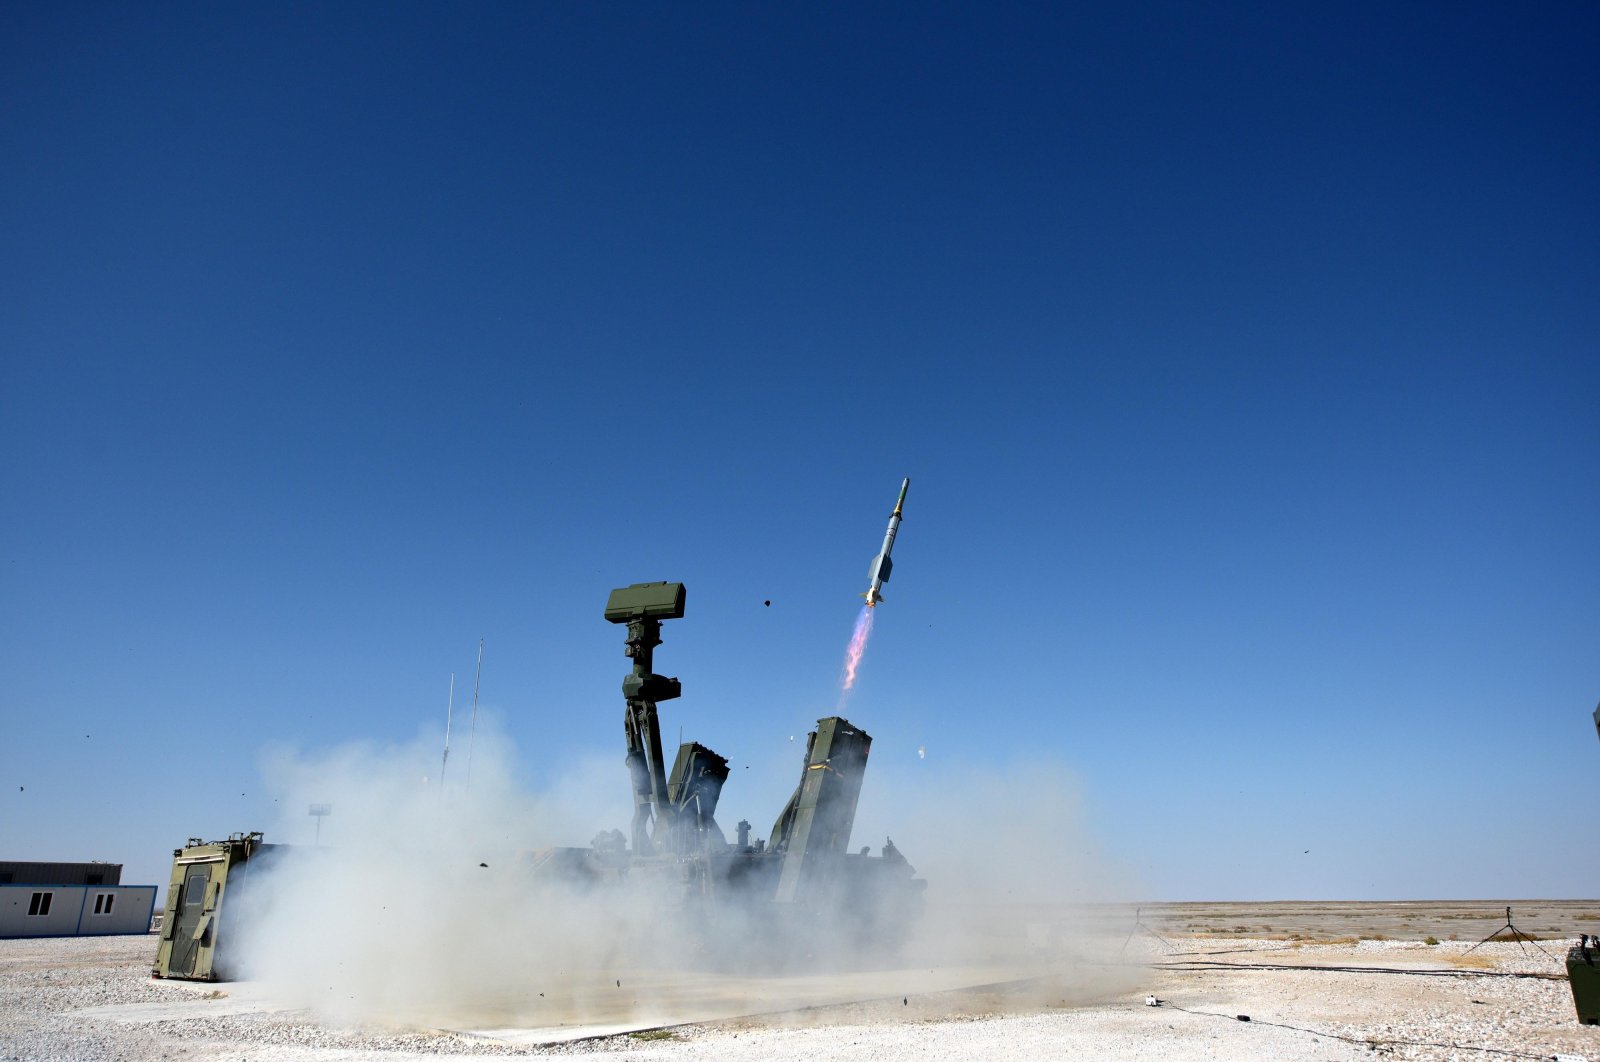 A file photo from the tests of the domestic low-altitude Hisar-A air defense system at the Defense Industries' complex in central Turkey's Aksaray province, Oct. 12, 2019. (DHA Photo)